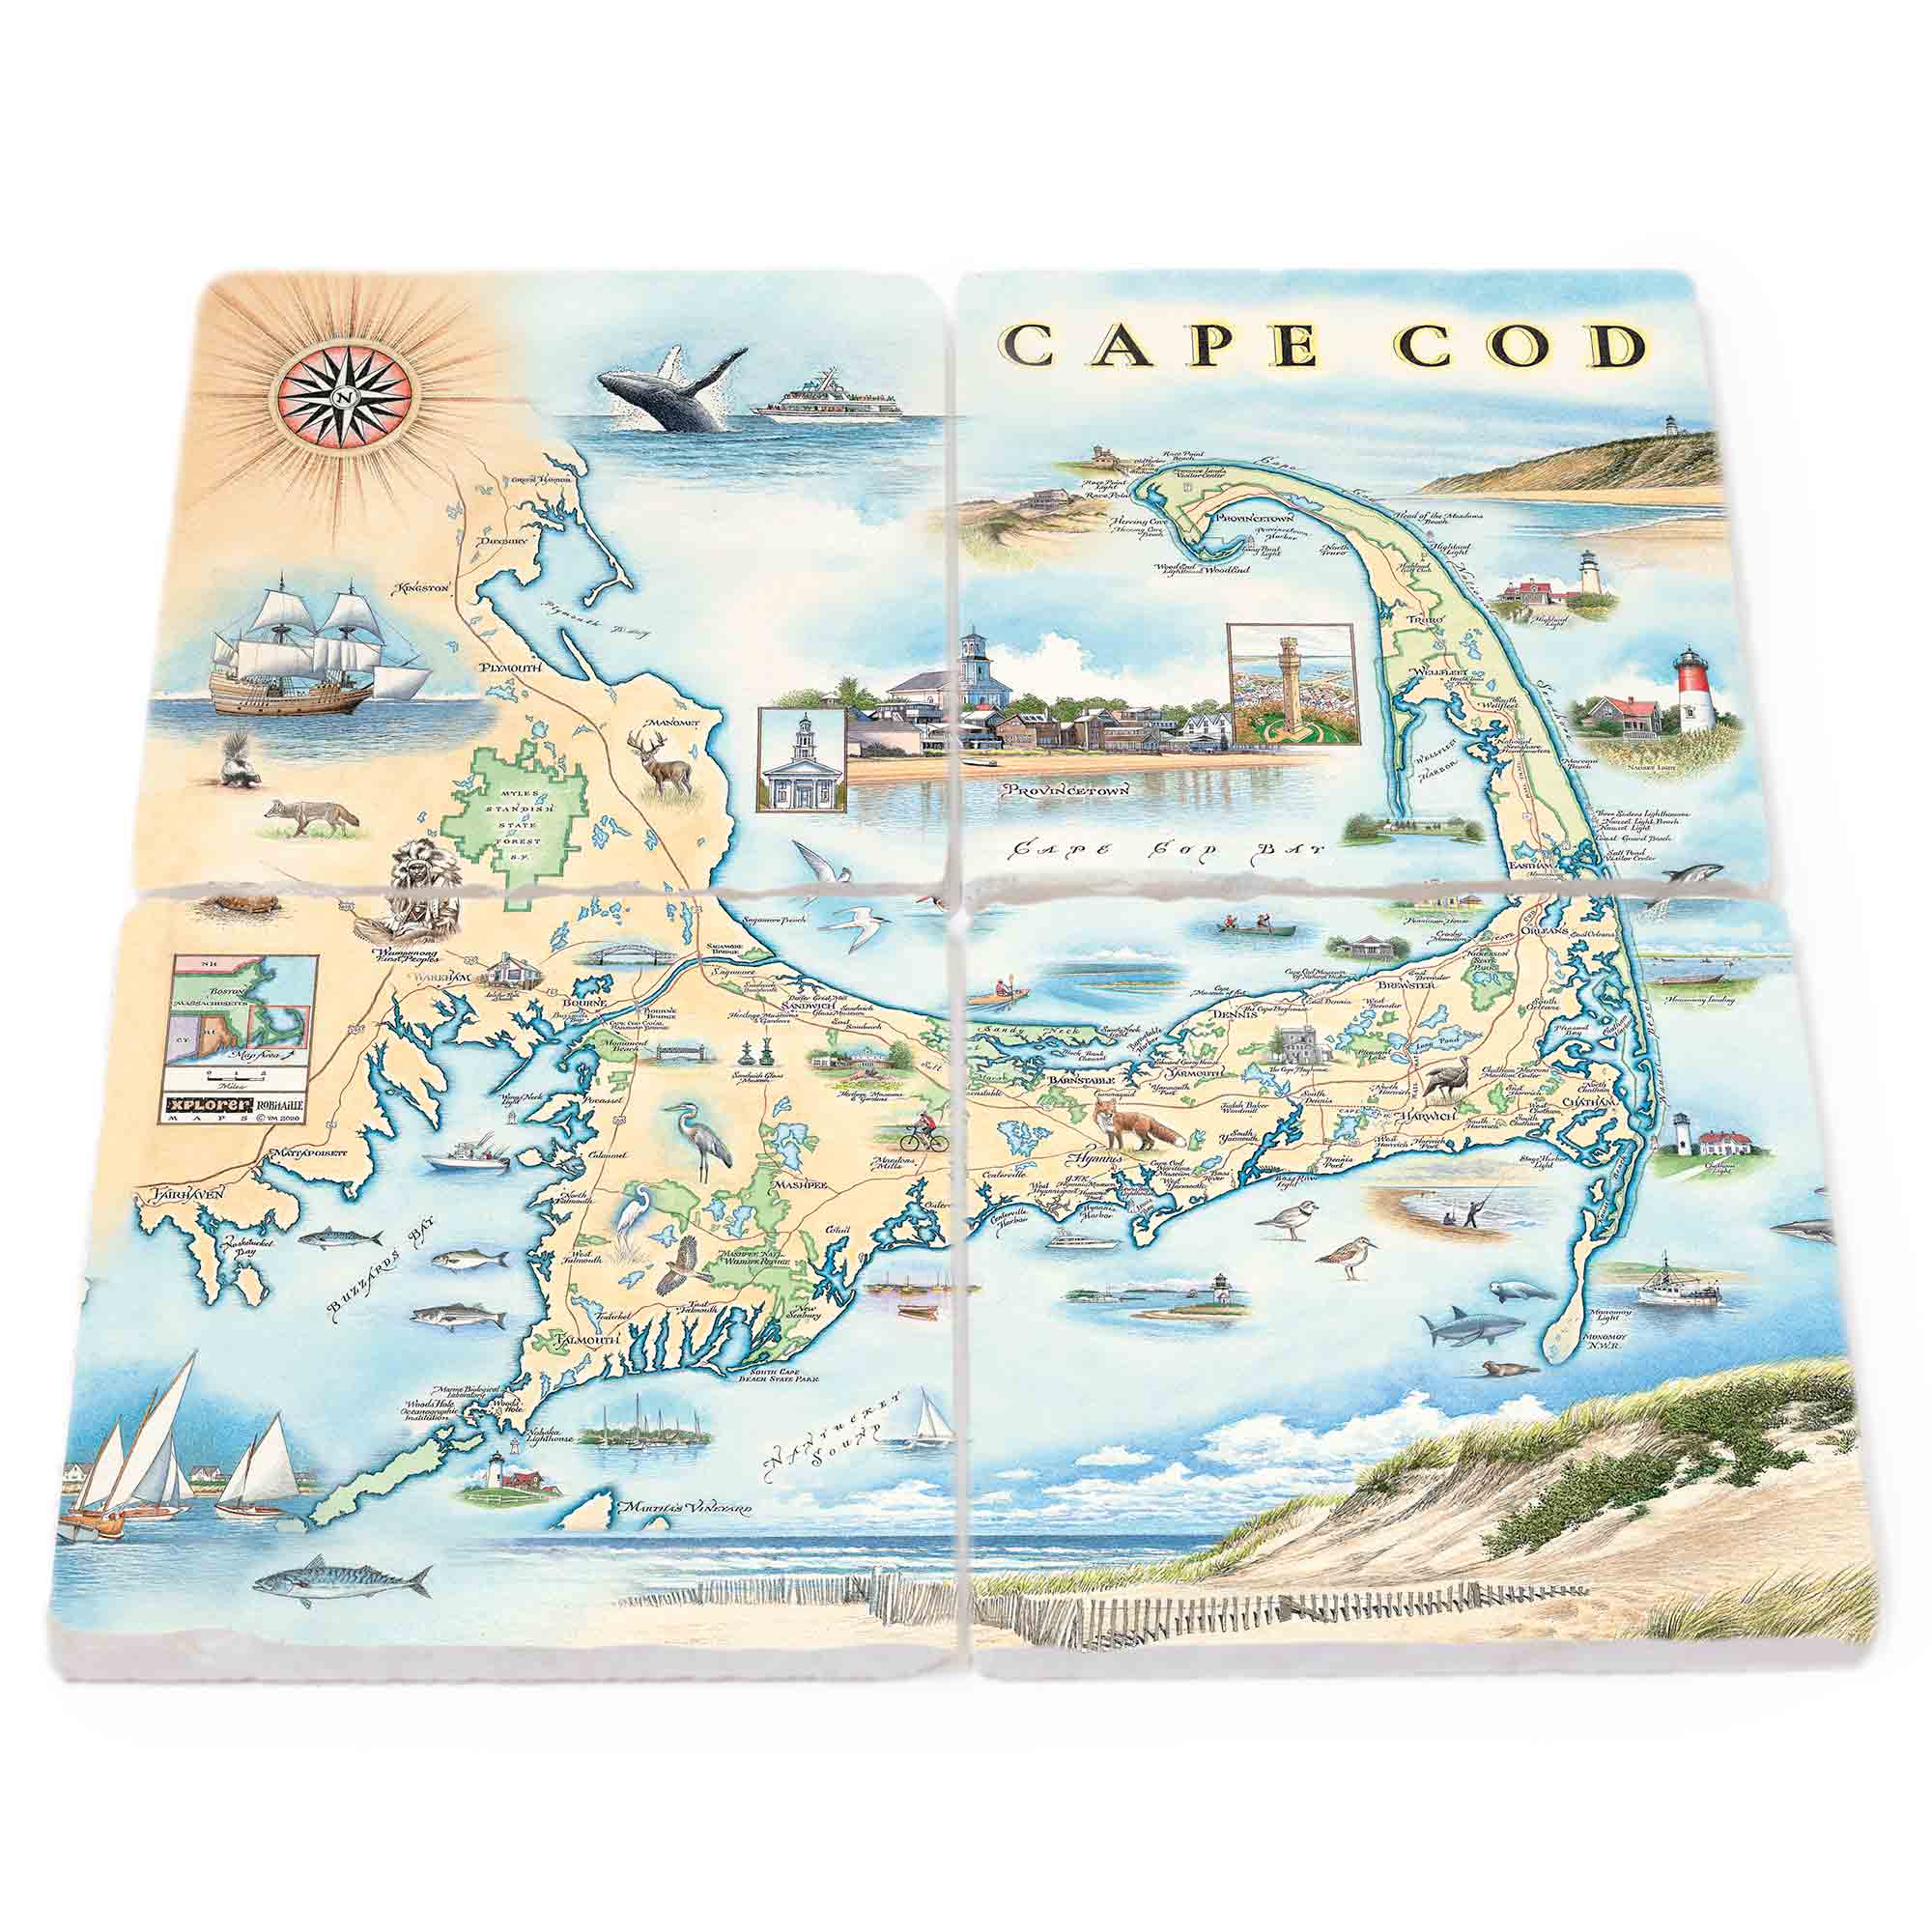 Natural Stone Coasters inspired by Cape Cod, Massachusetts. The design features a harmonious blend of blue, green, and tan colors, capturing the essence of the coastal region. Plymouth Rock, intricate sealife, charming lighthouses, and boats adorn the map, creating a picturesque and nautical ambiance.